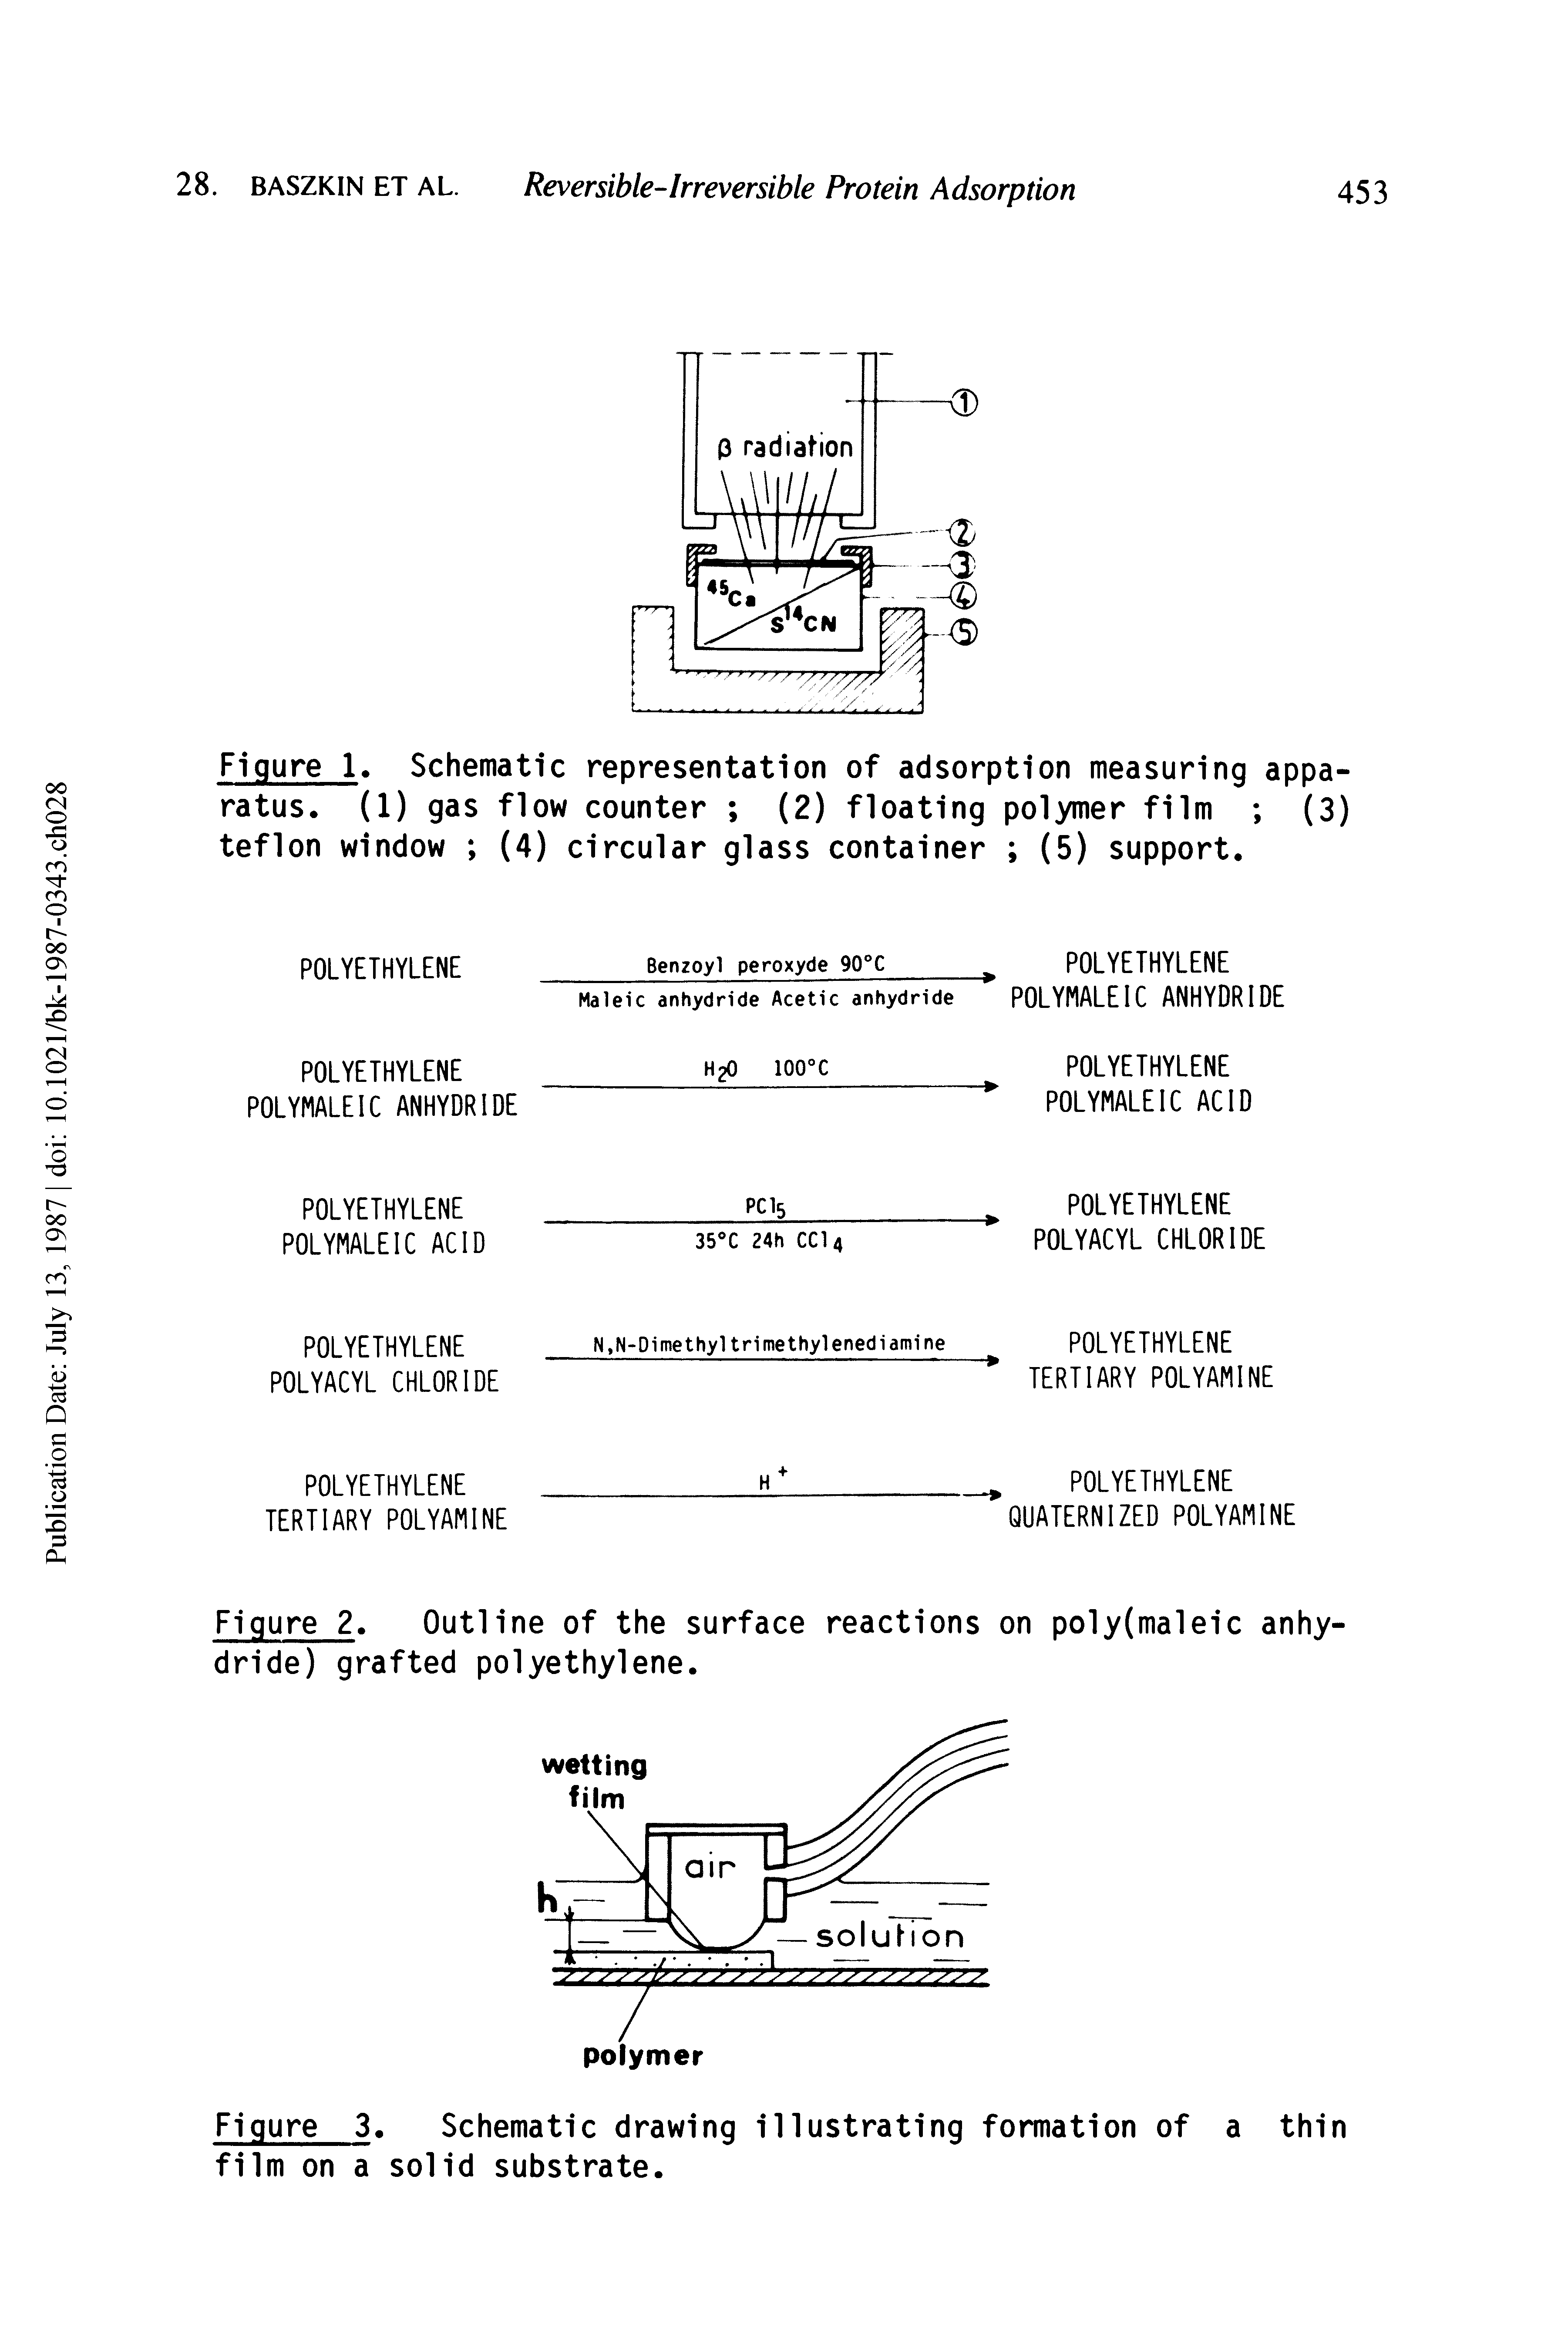 Figure 2. Outline of the surface reactions on poly(maleic anhydride) grafted polyethylene.